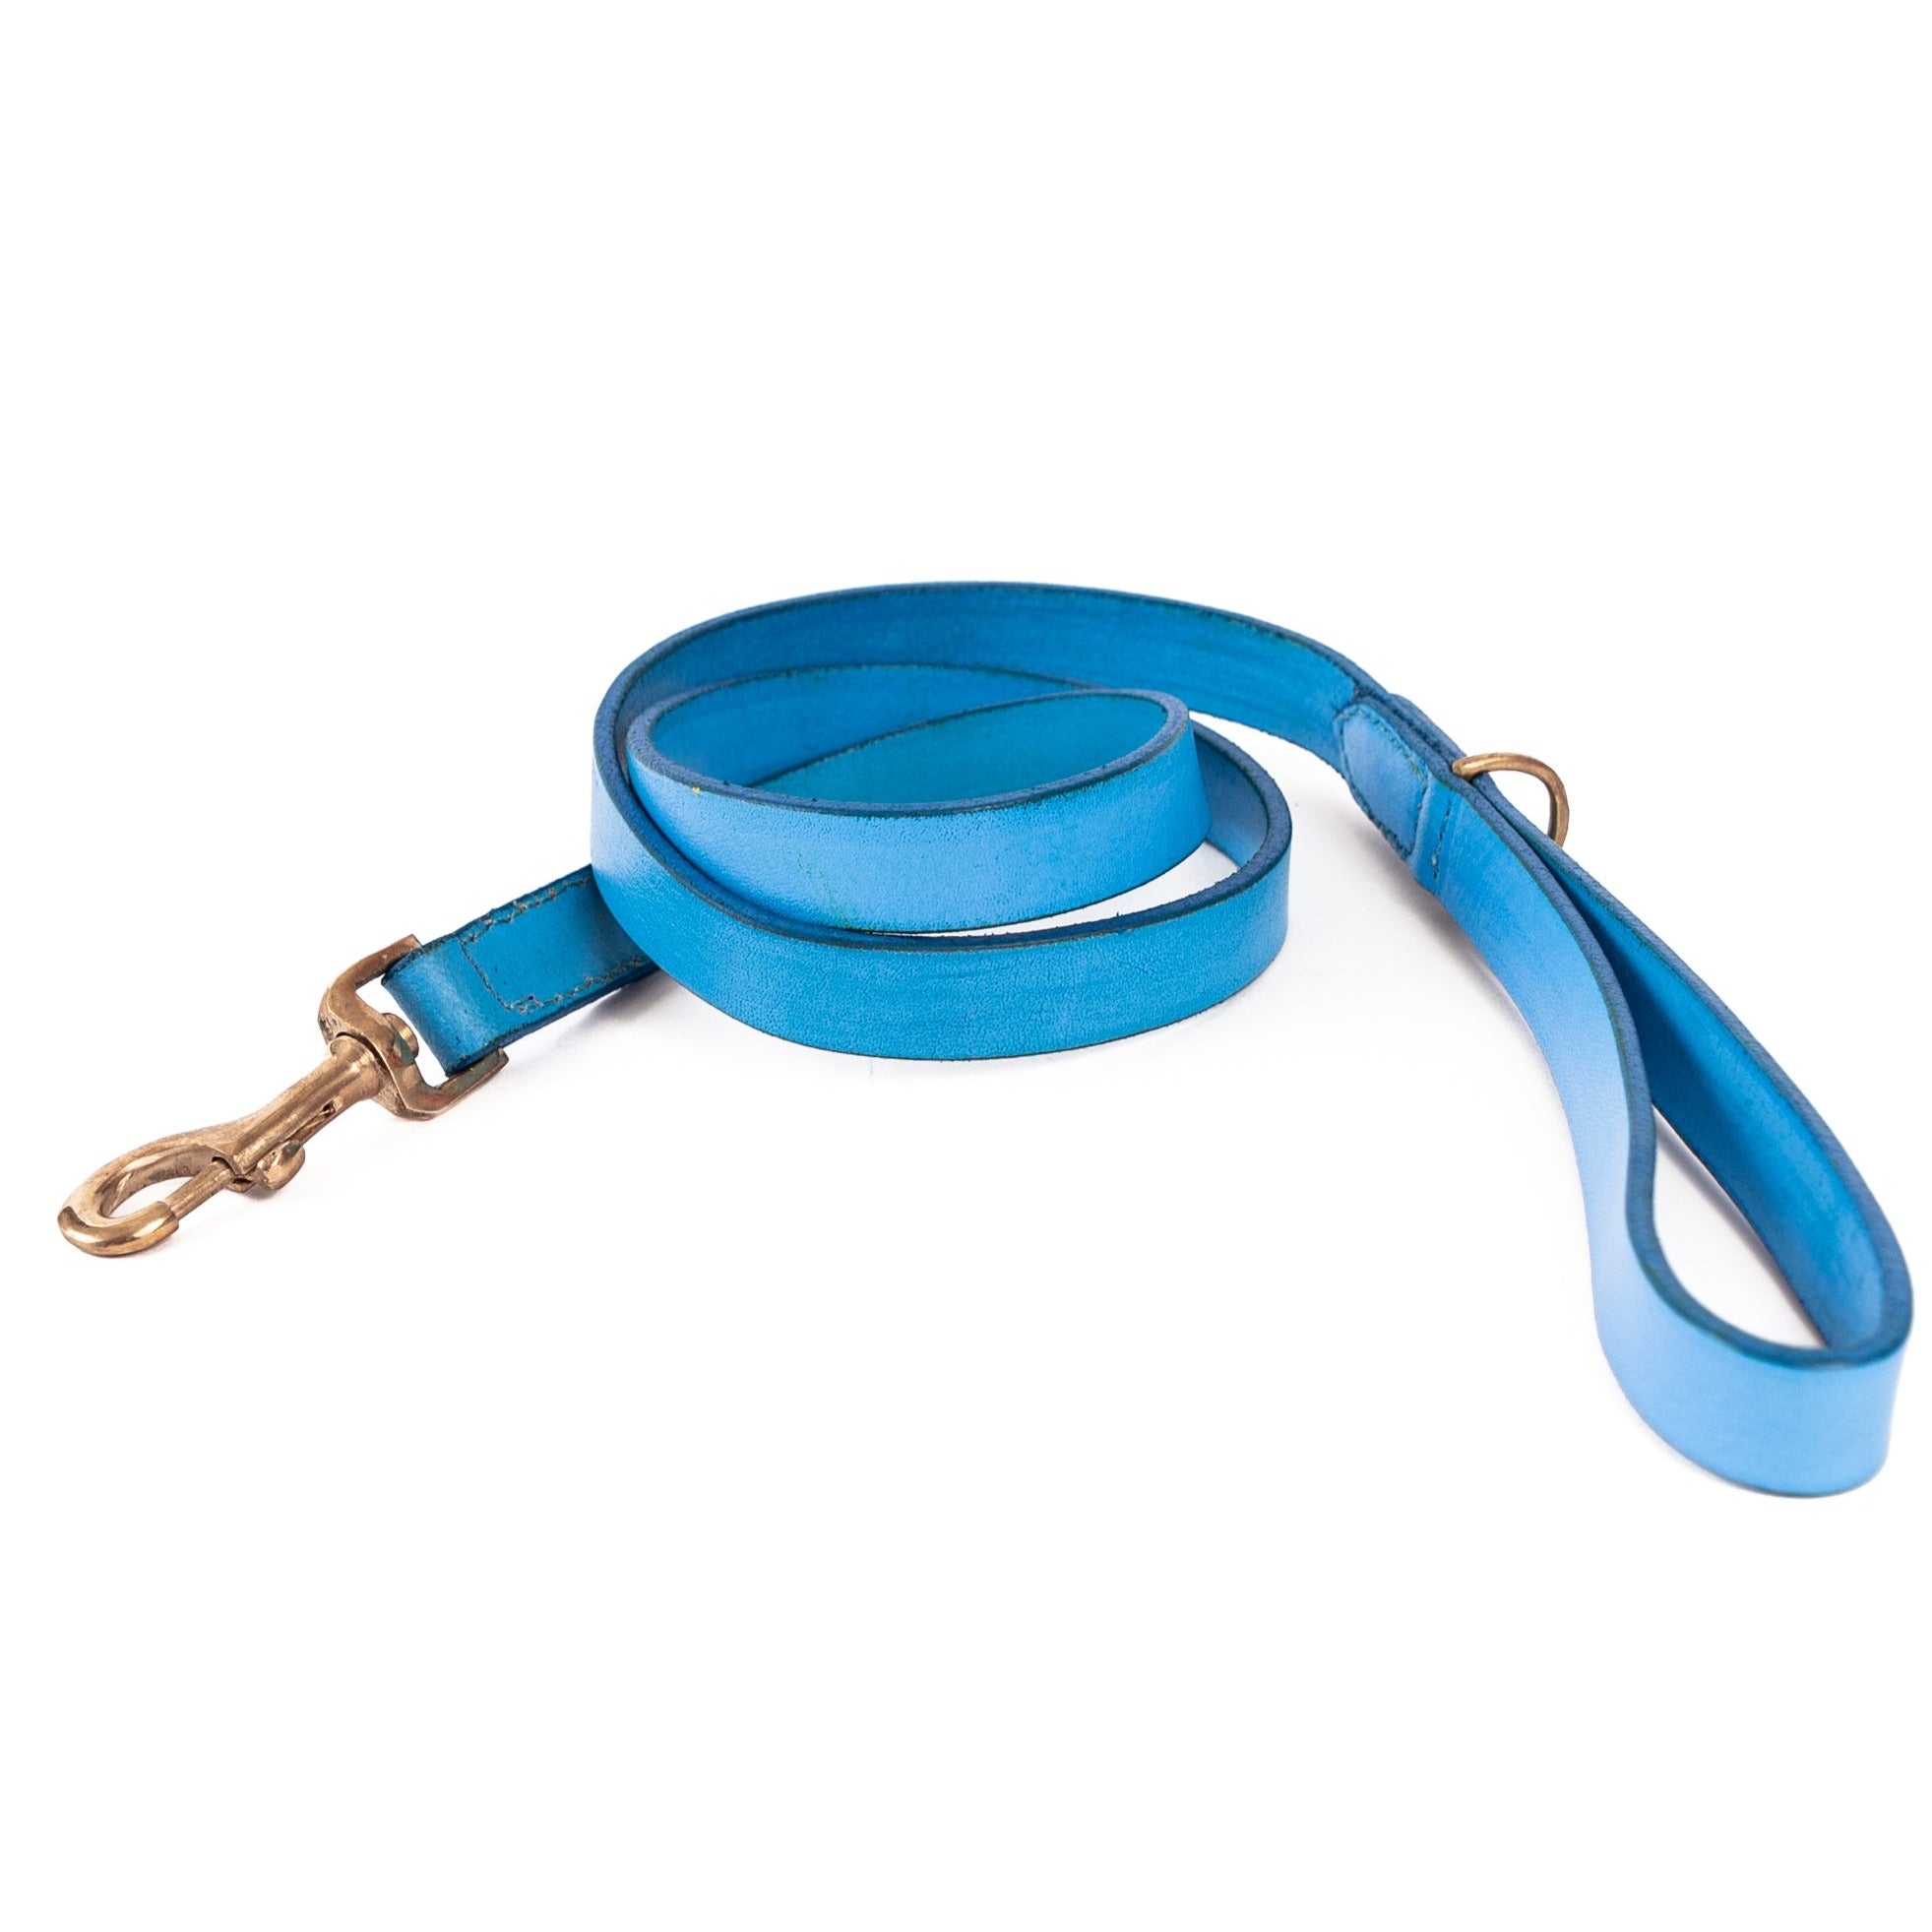 A Bald Lead Blue by Georgie Paws, a blue leather designer dog lead with a metal clasp, coiled and isolated on a white background. The leash features stitching details and a looped handle.